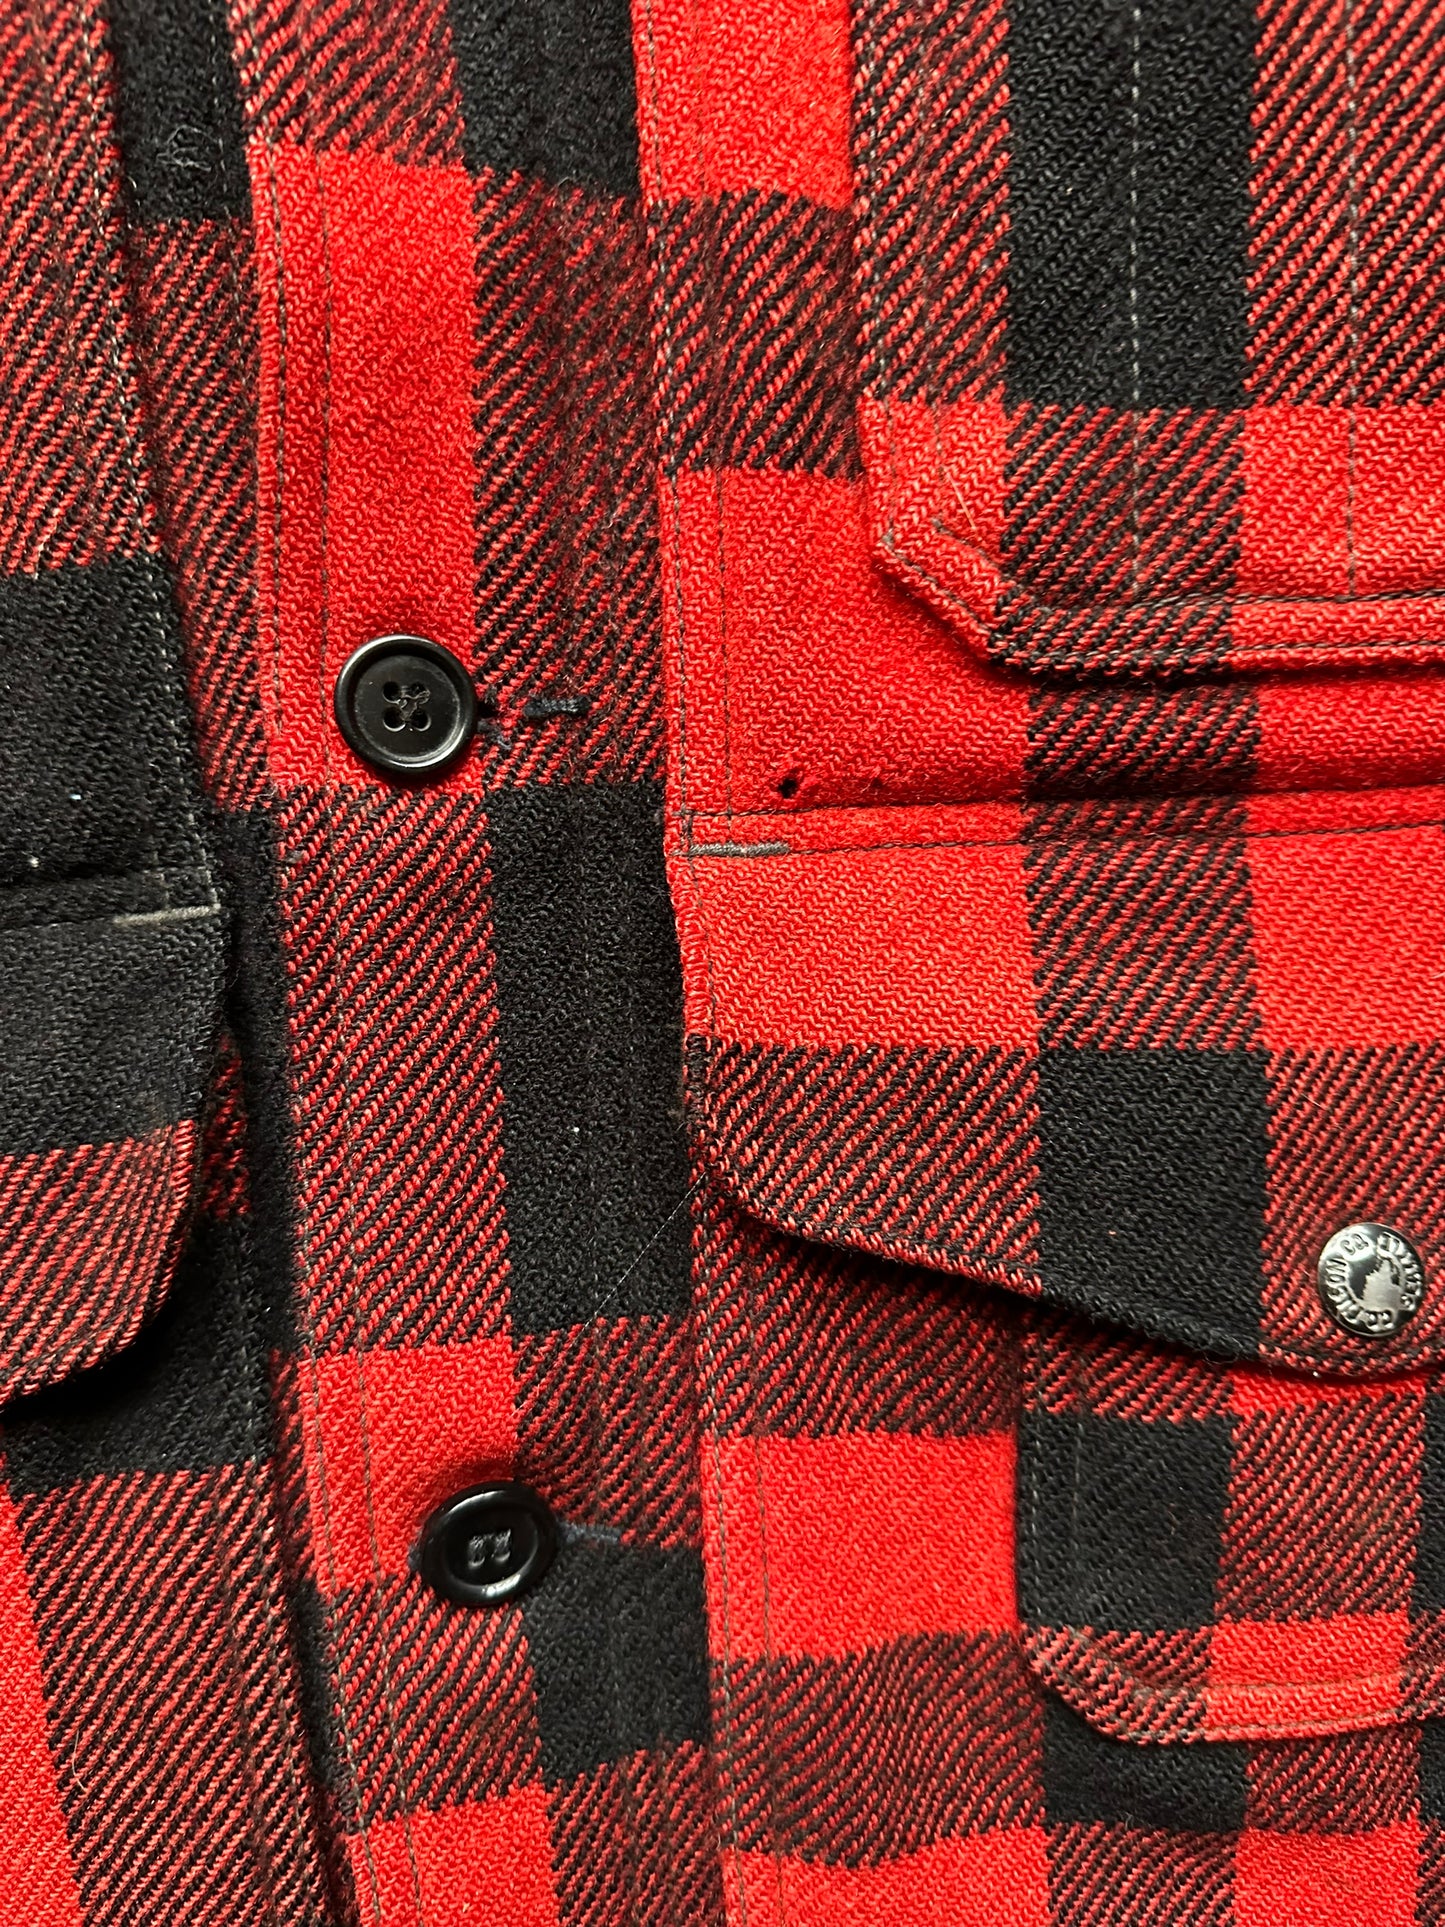 Small Moth Nibble on Left Upper Chest View on Vintage Sun Faded Union Made Filson  Red and Black Mackinaw Cruiser SZ 44 |  Vintage Filson Mackinaw | Vintage Filson Workwear Seattle